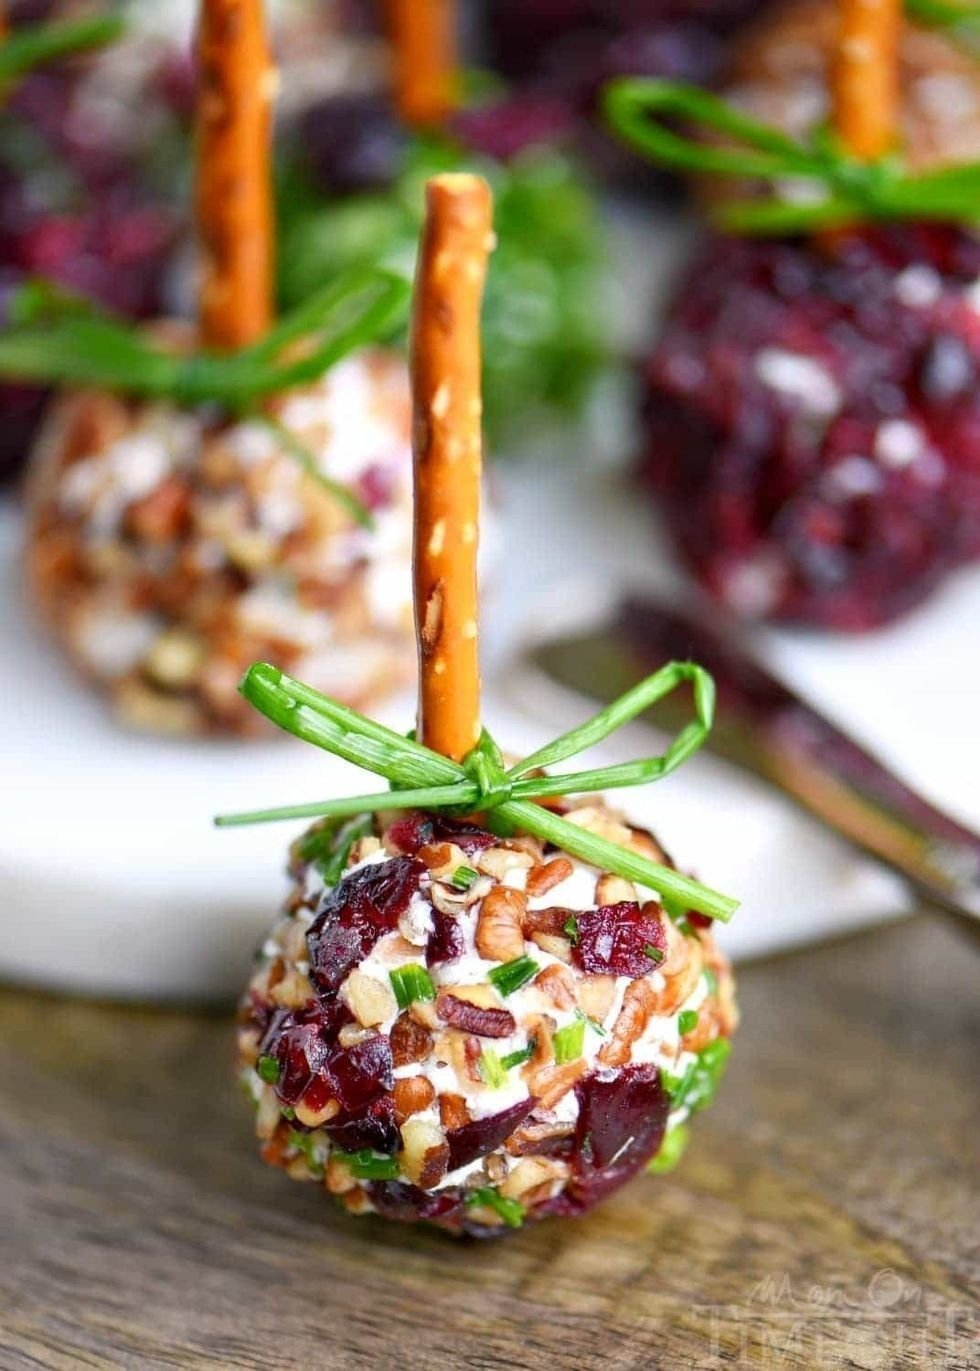 10 Trendy Thanksgiving Hors D Oeuvres Ideas easy thanksgiving appetizer ideas best homemade thanksgiving hors 2022